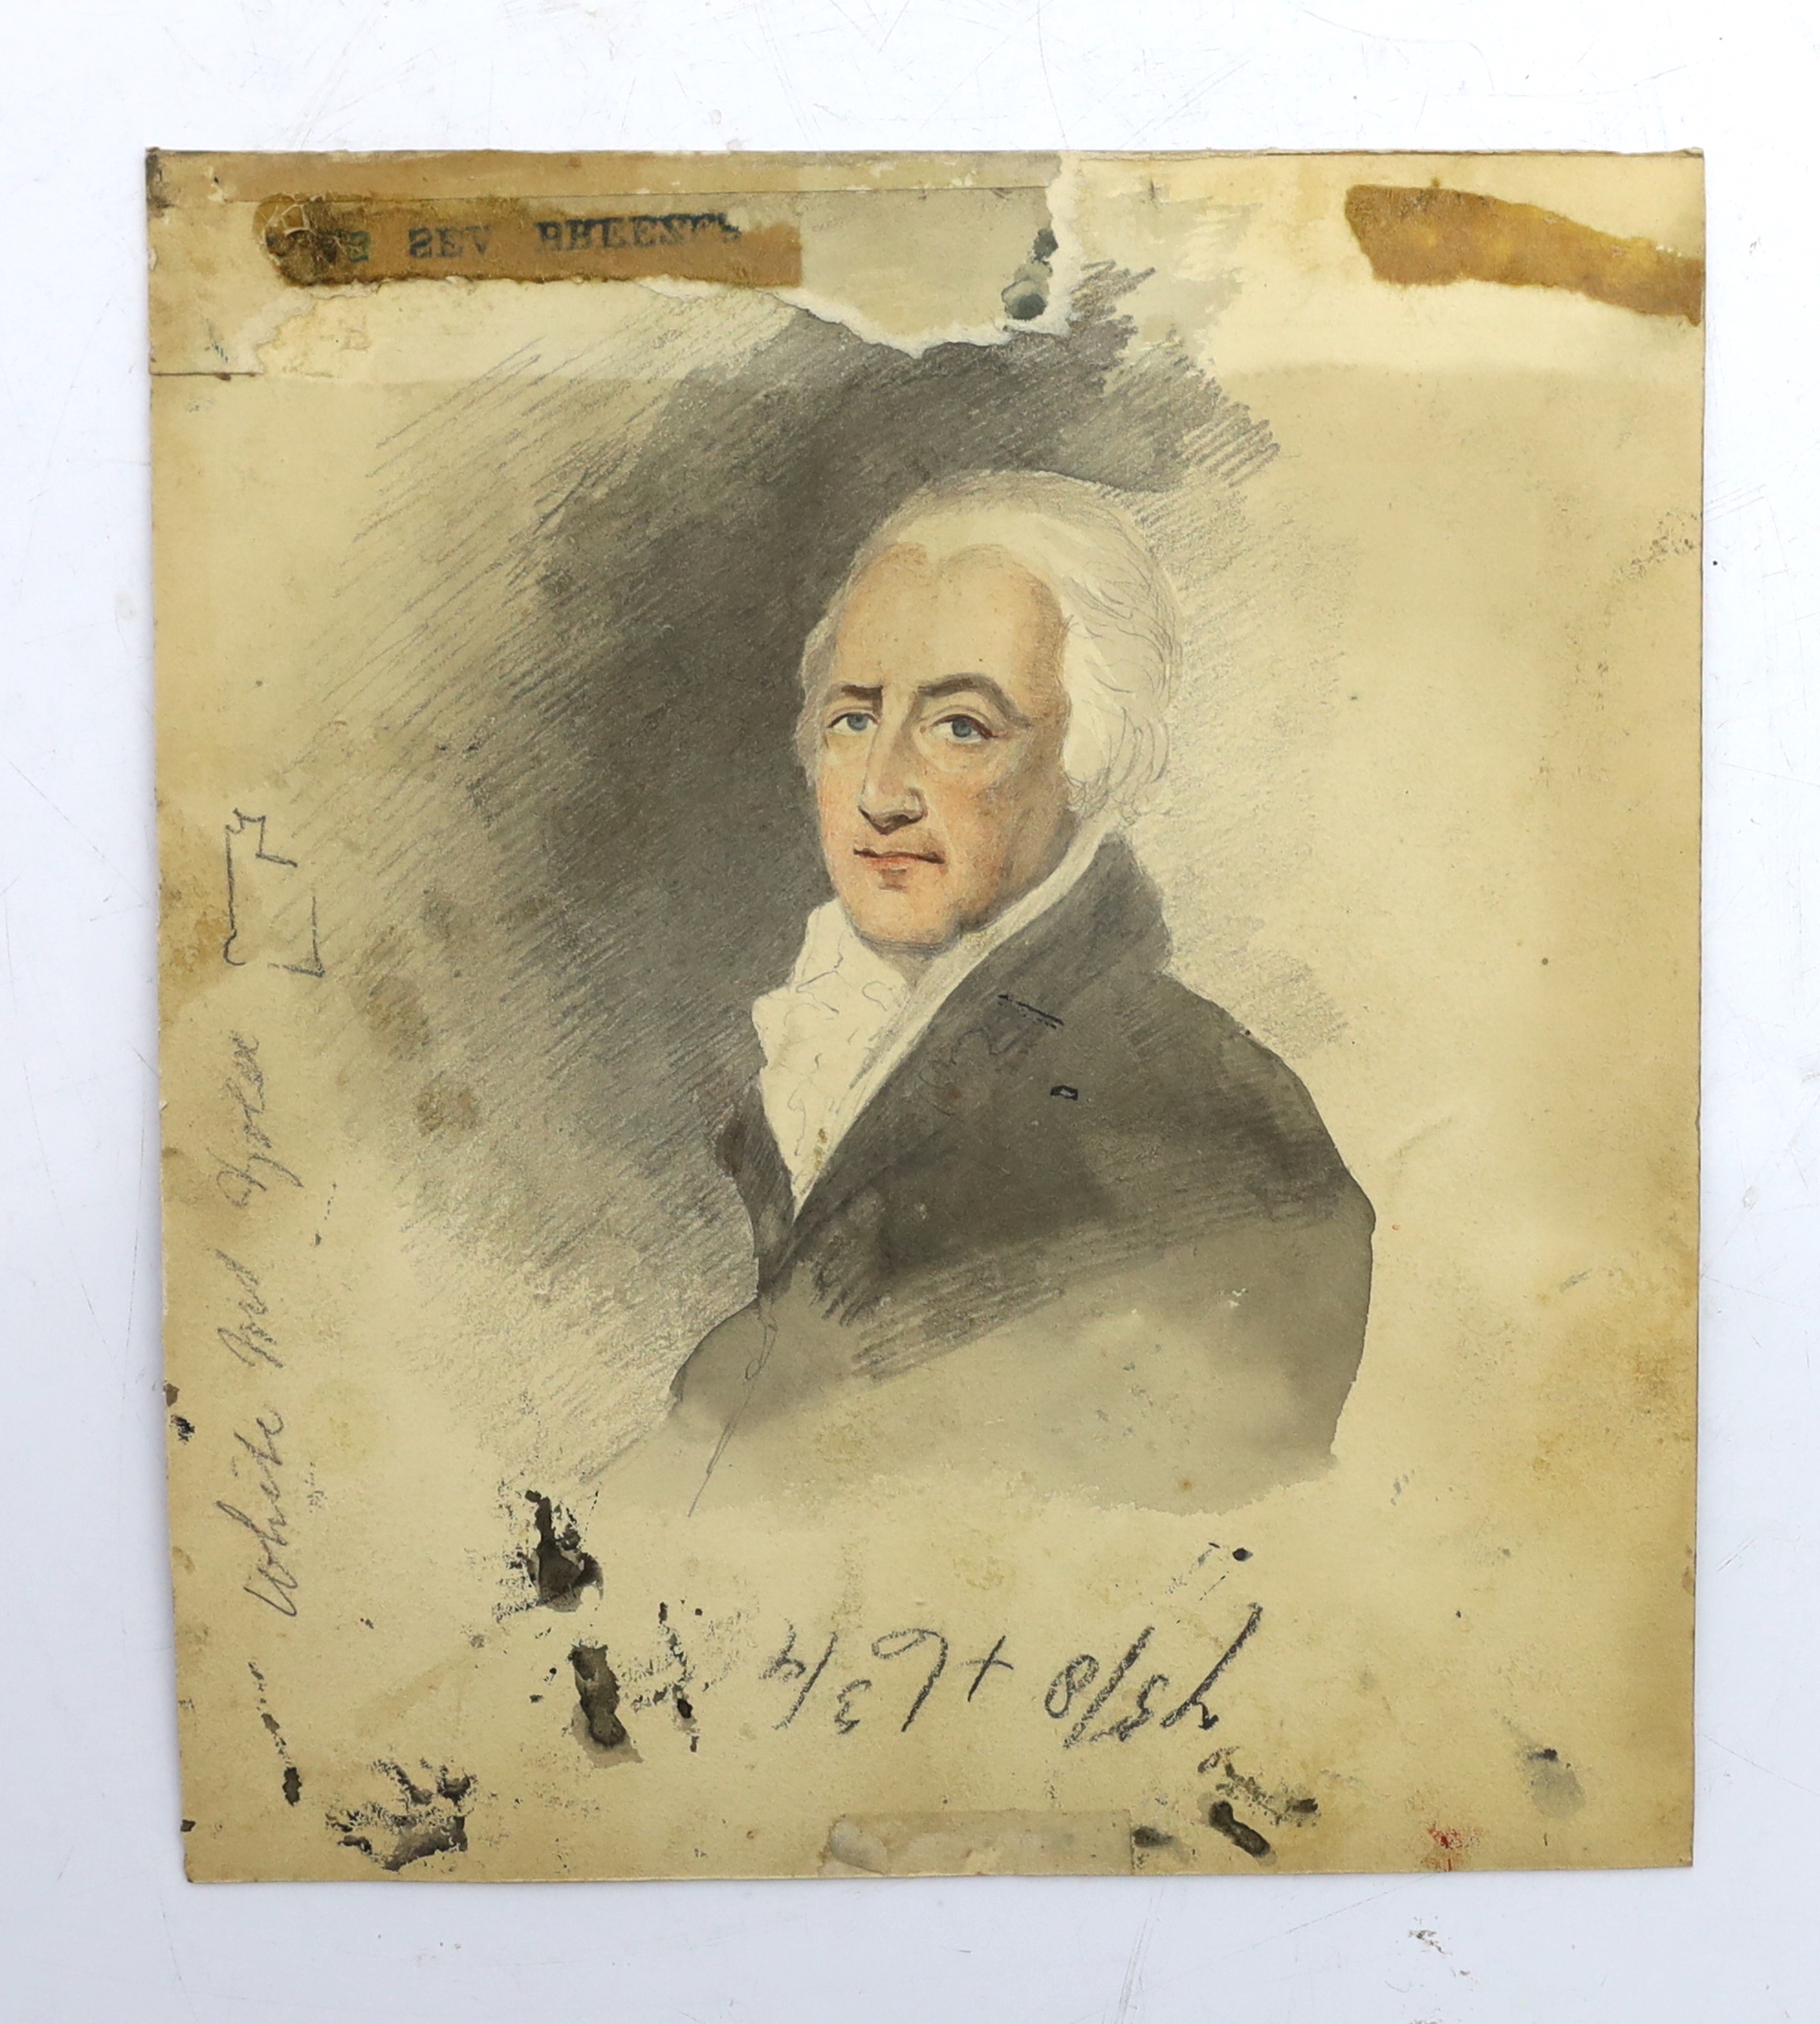 Late 18th century English School - Portrait of Sir William Eden, later 1st Baron Auckland, watercolour on card, 20 x 18cm. A sketch of the sitter verso.